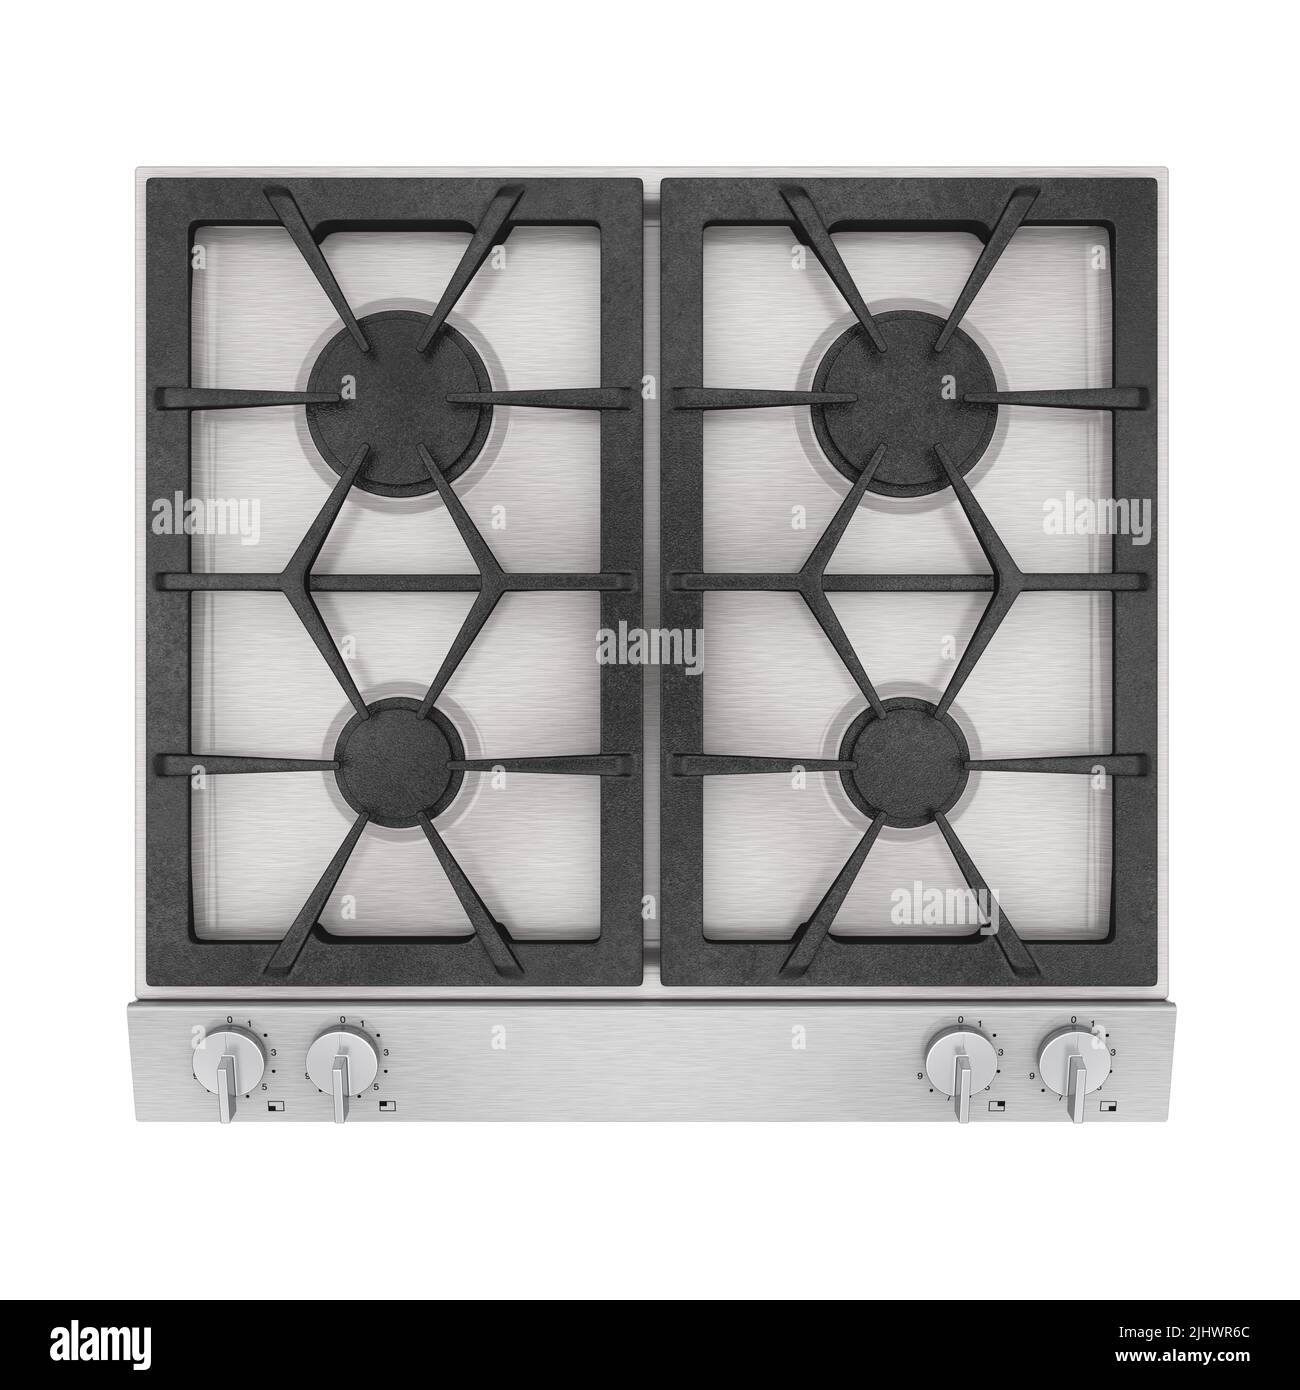 Gas Cooktop Isolated Stock Photo